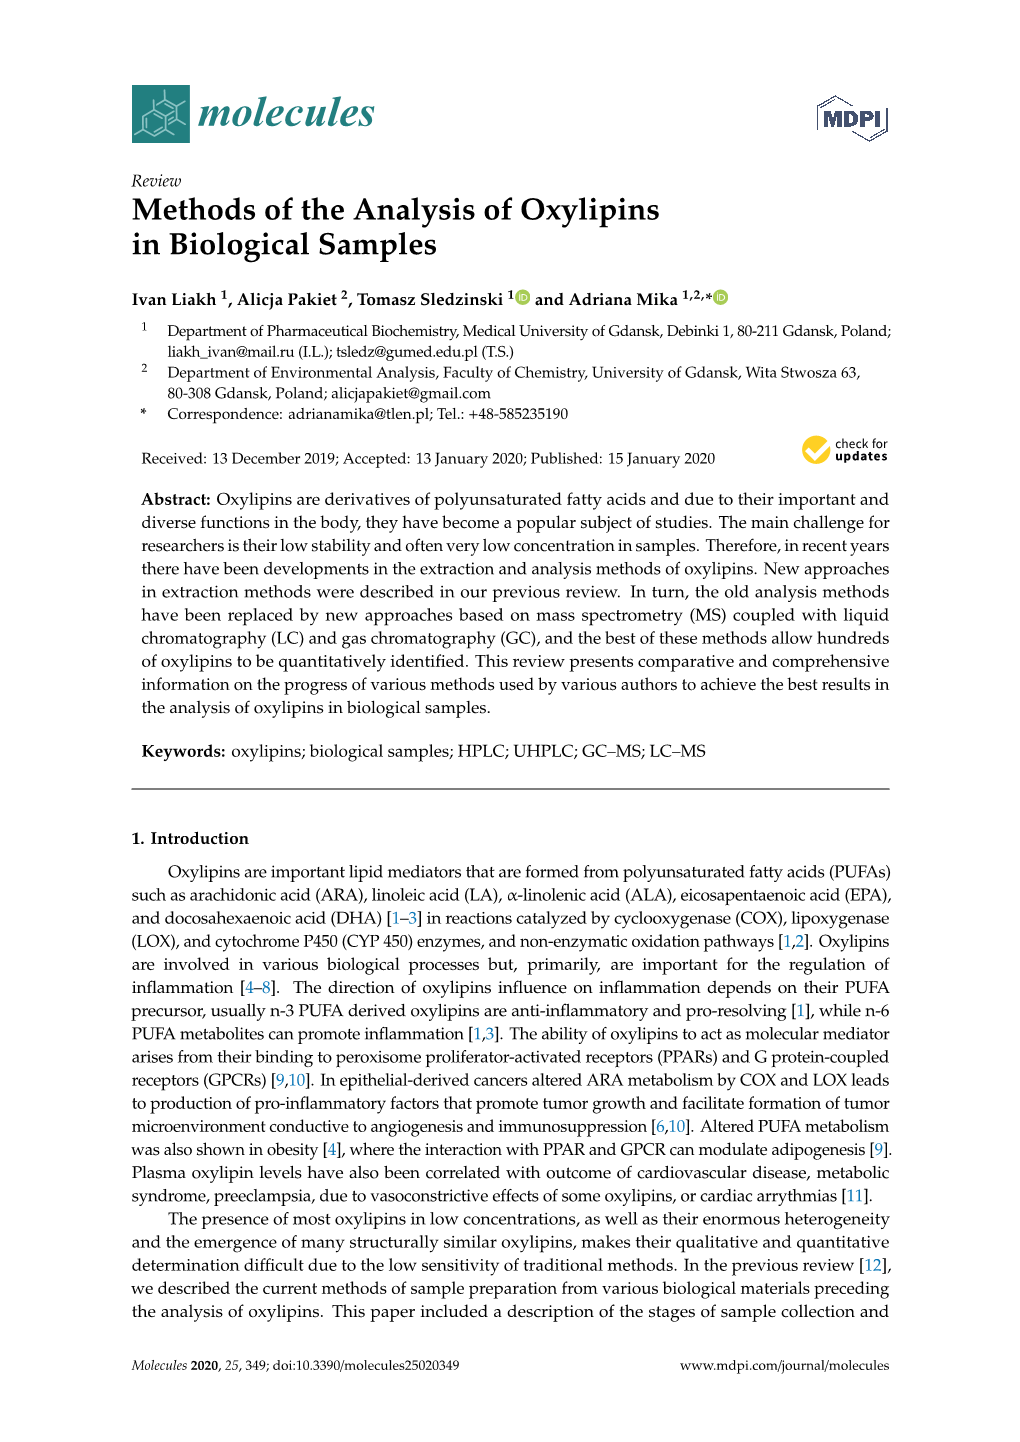 Methods of the Analysis of Oxylipins in Biological Samples